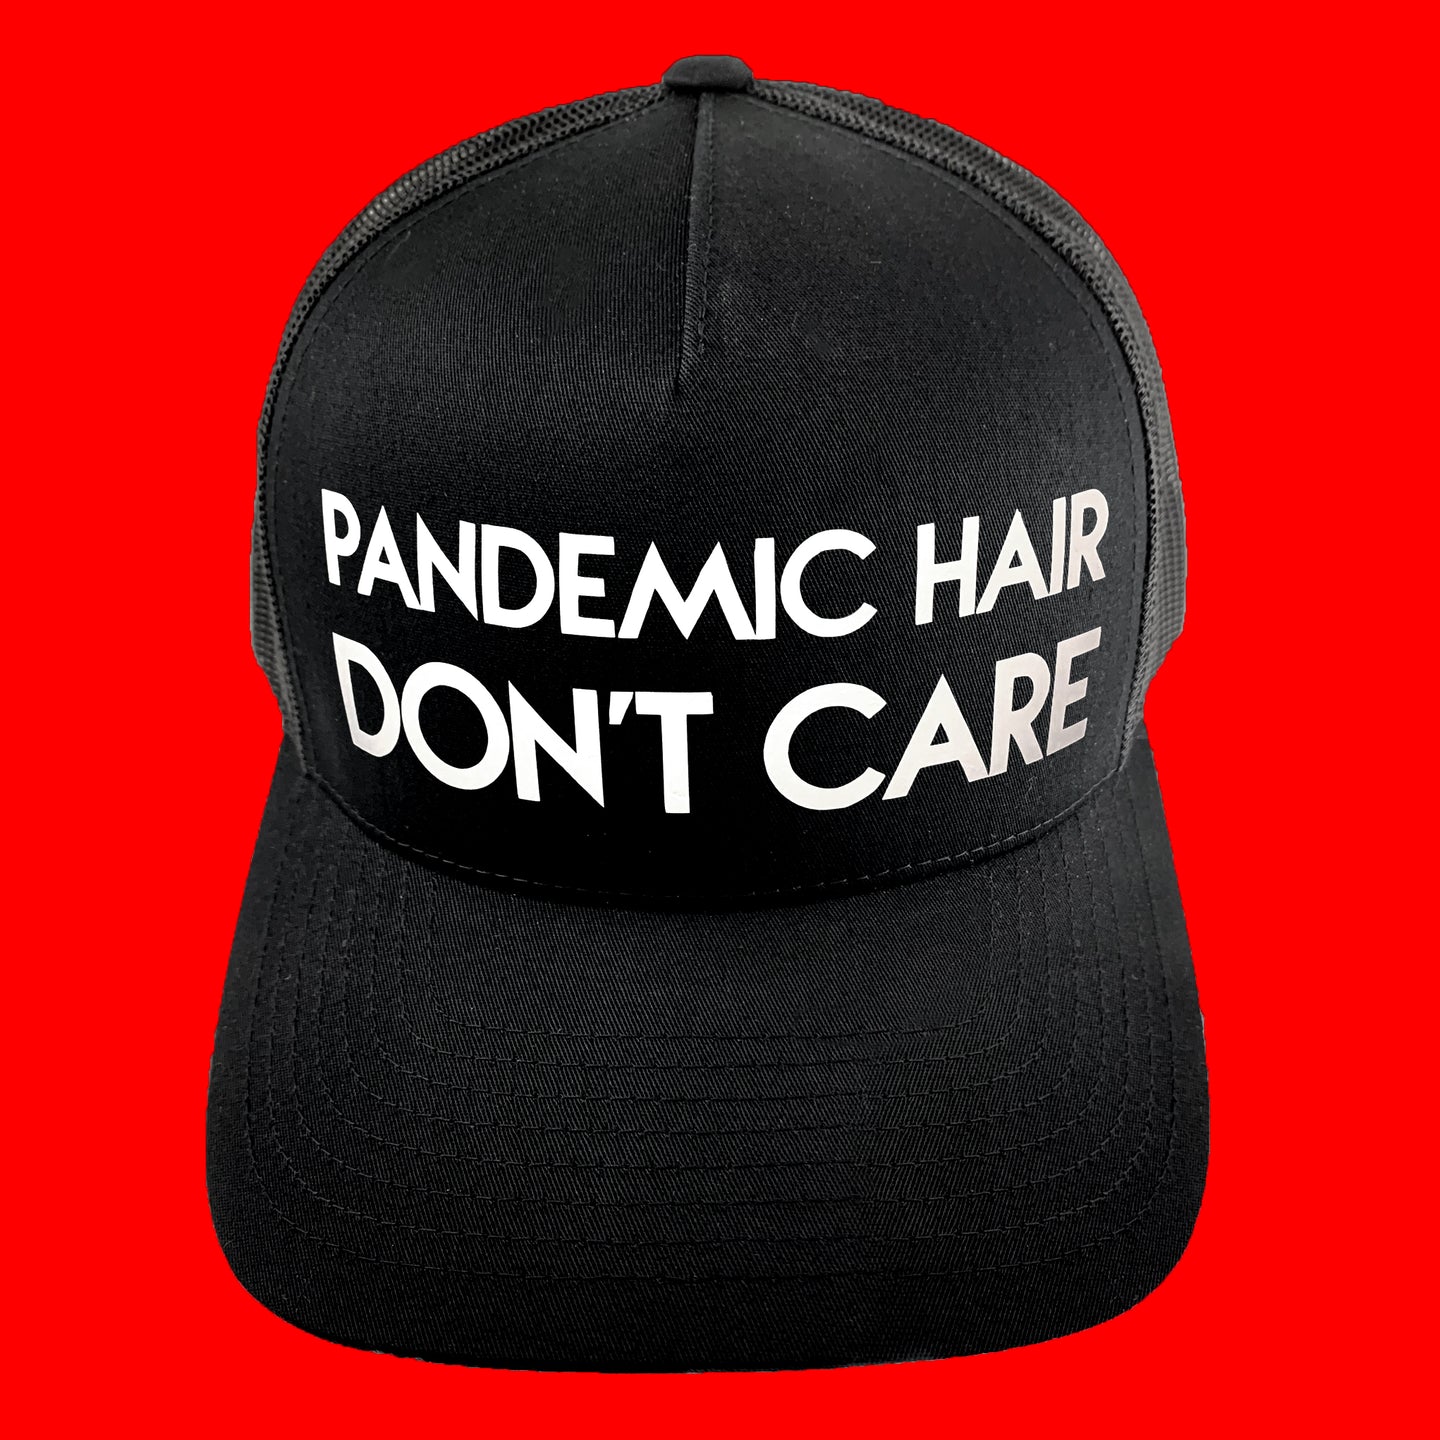 Classic black snapback hat with bold Pandemic Hair Don't Care white matte text by BBJ / Glitter Garage. Glitter and matte vinyl colour options. Unisex style, breathable mesh back with matching plastic snap closure fits most.